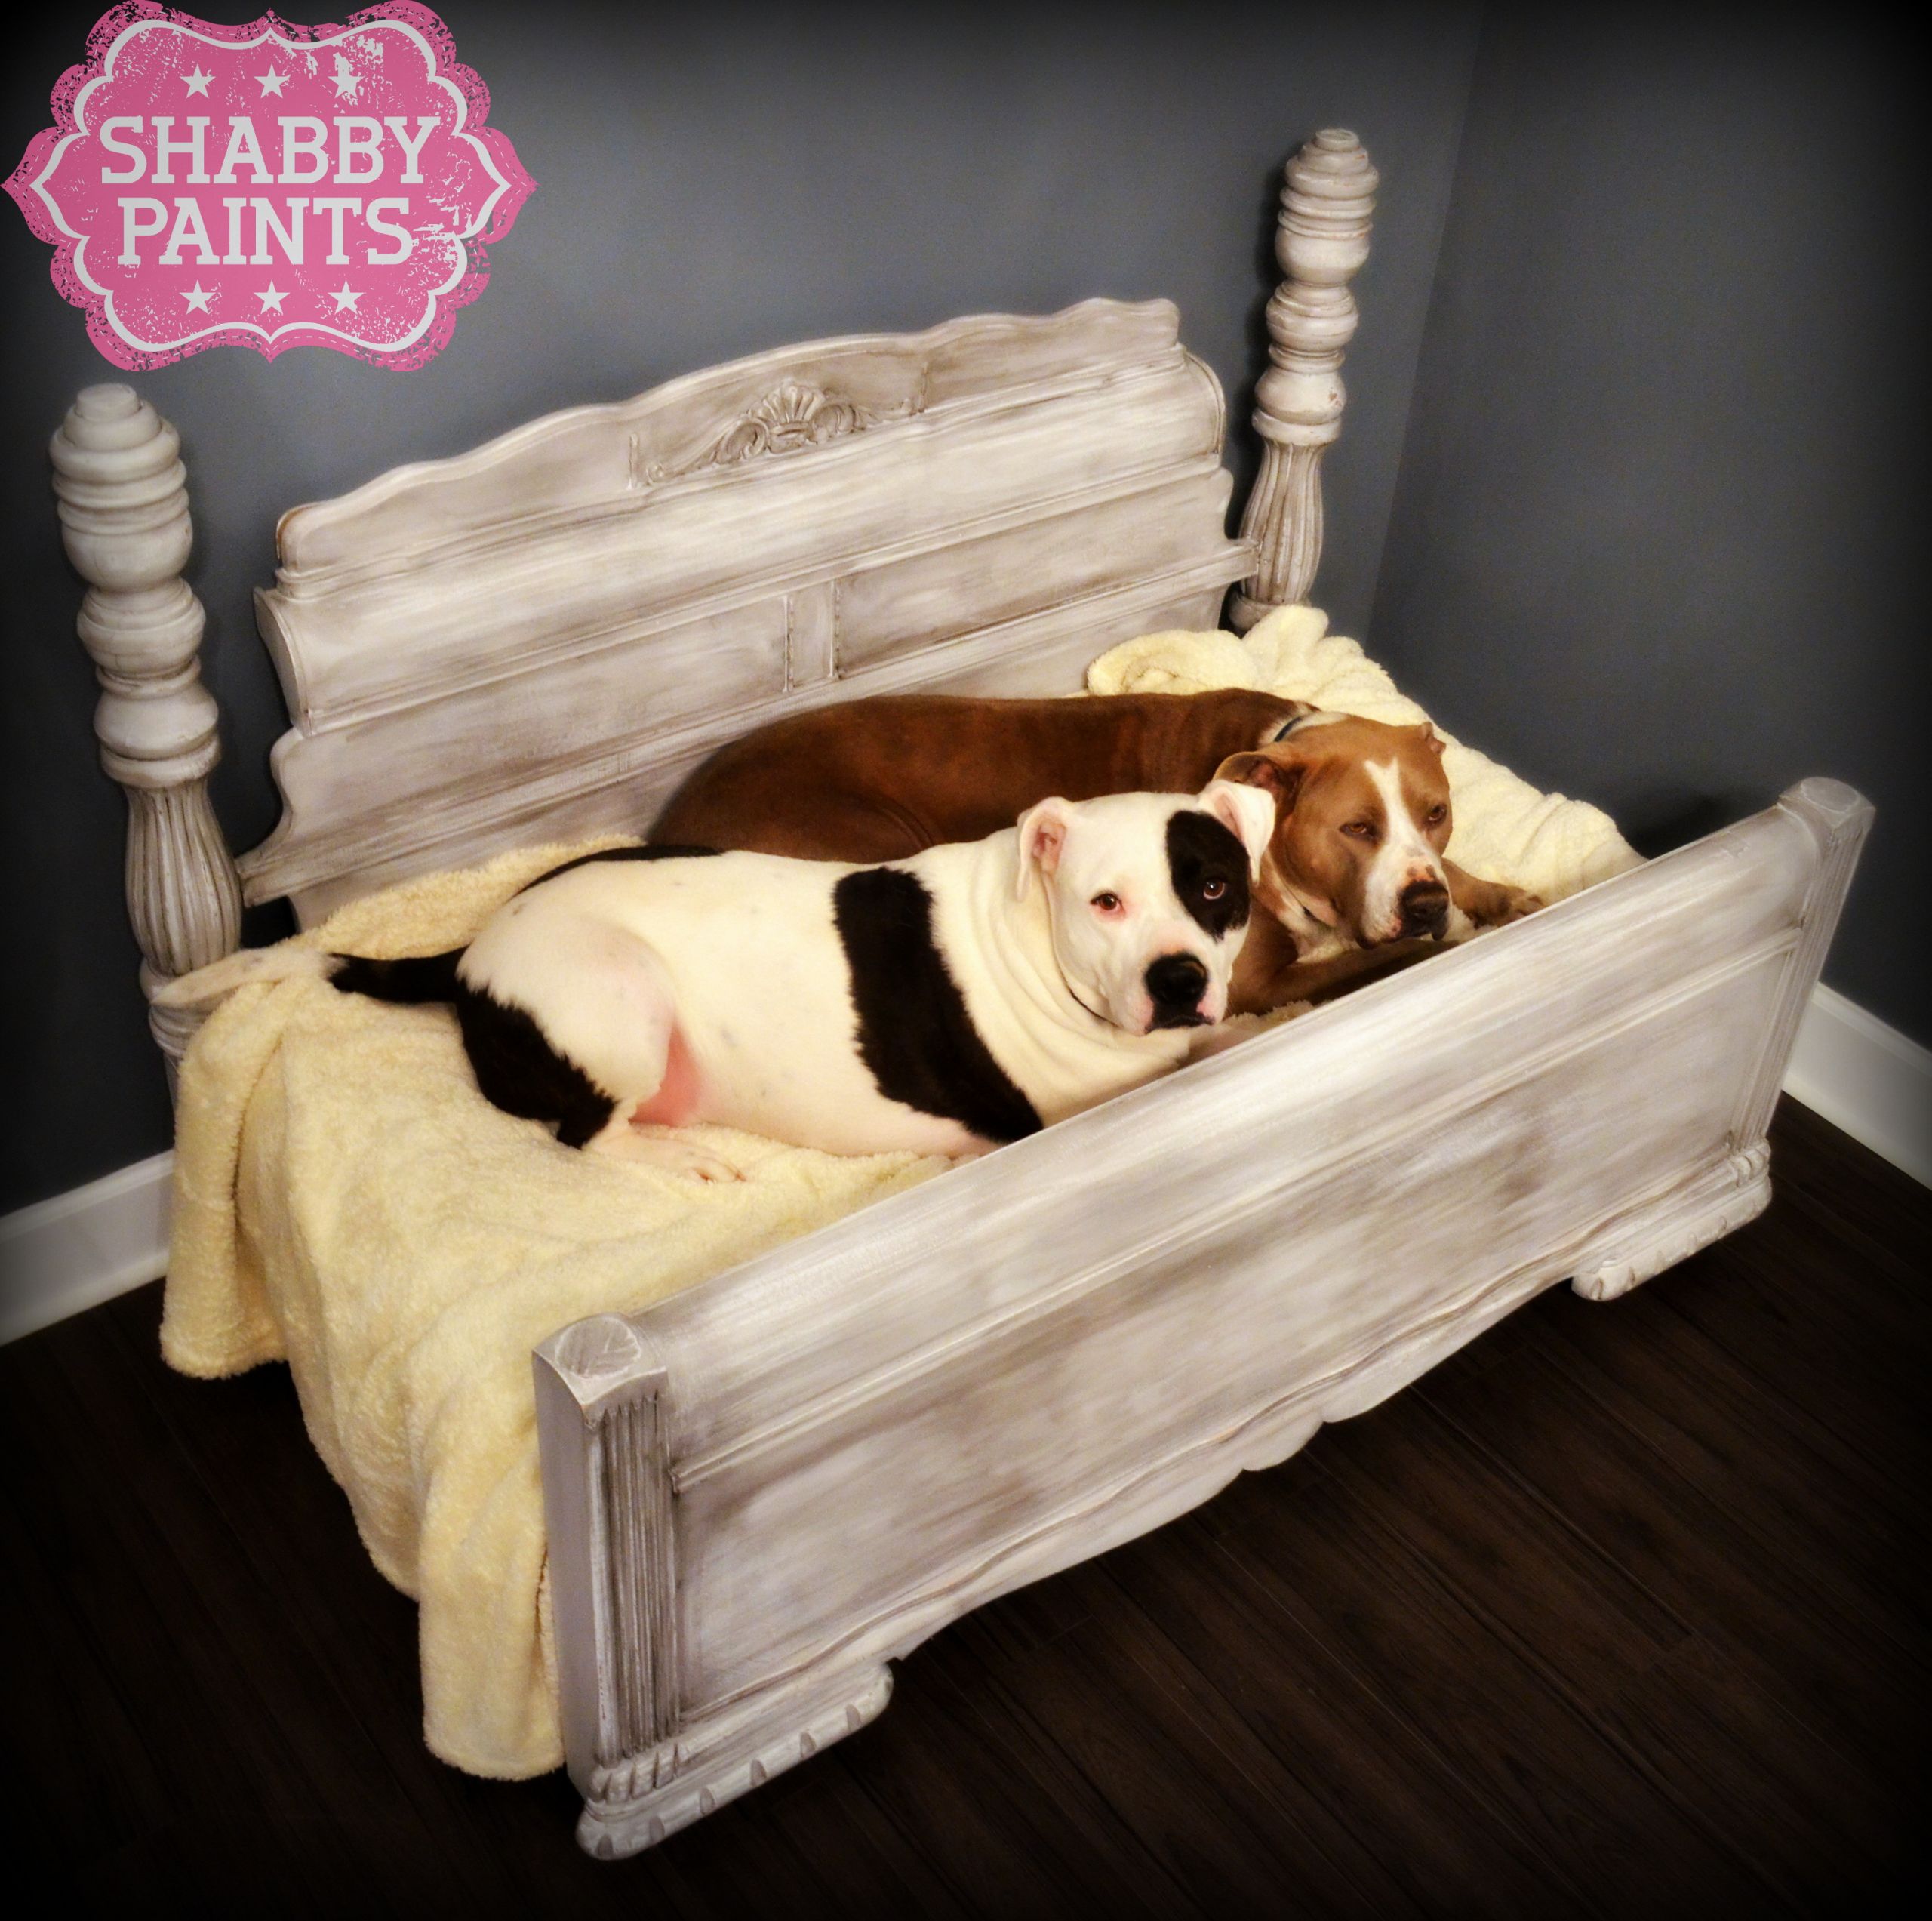 DIY Dog Bed Frame
 Upcycled Pet Beds Transformed with Shabby Paints Shabby